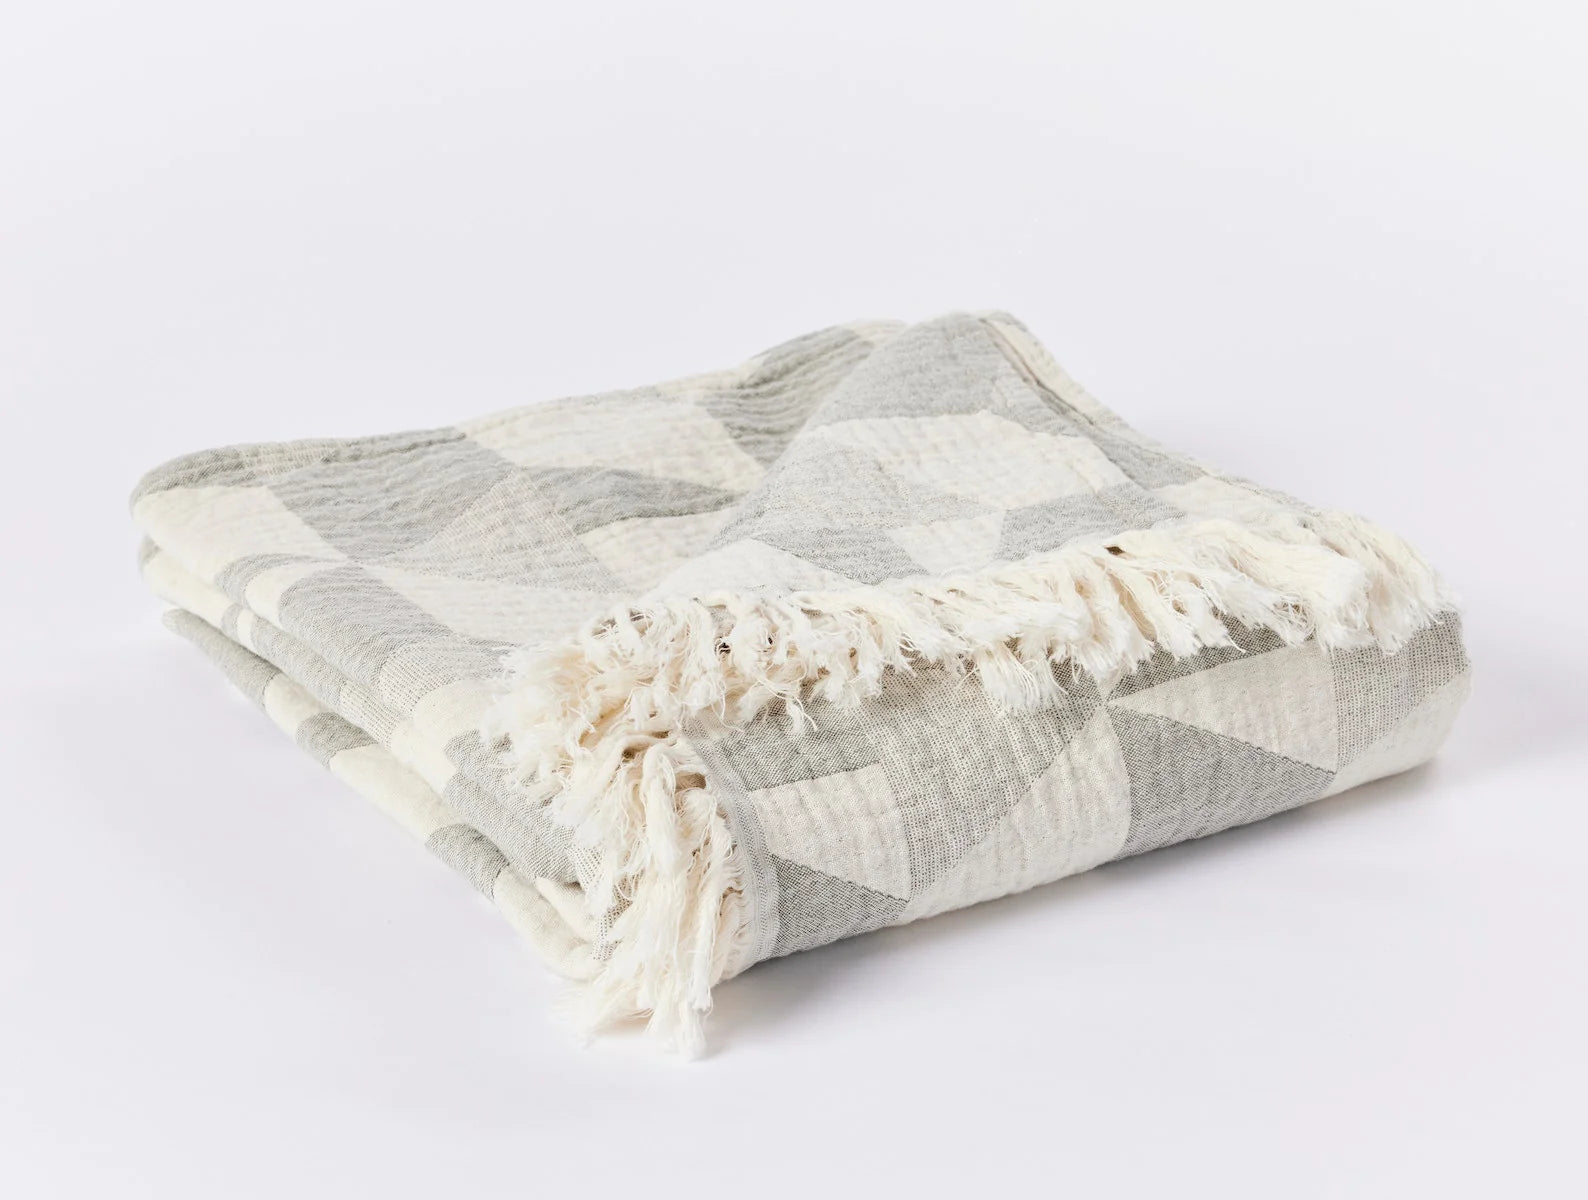 Pismo Organic Cotton Throw in Cypress folded to show off the 2.5" fringe on the top and bottom. Bright, white background.